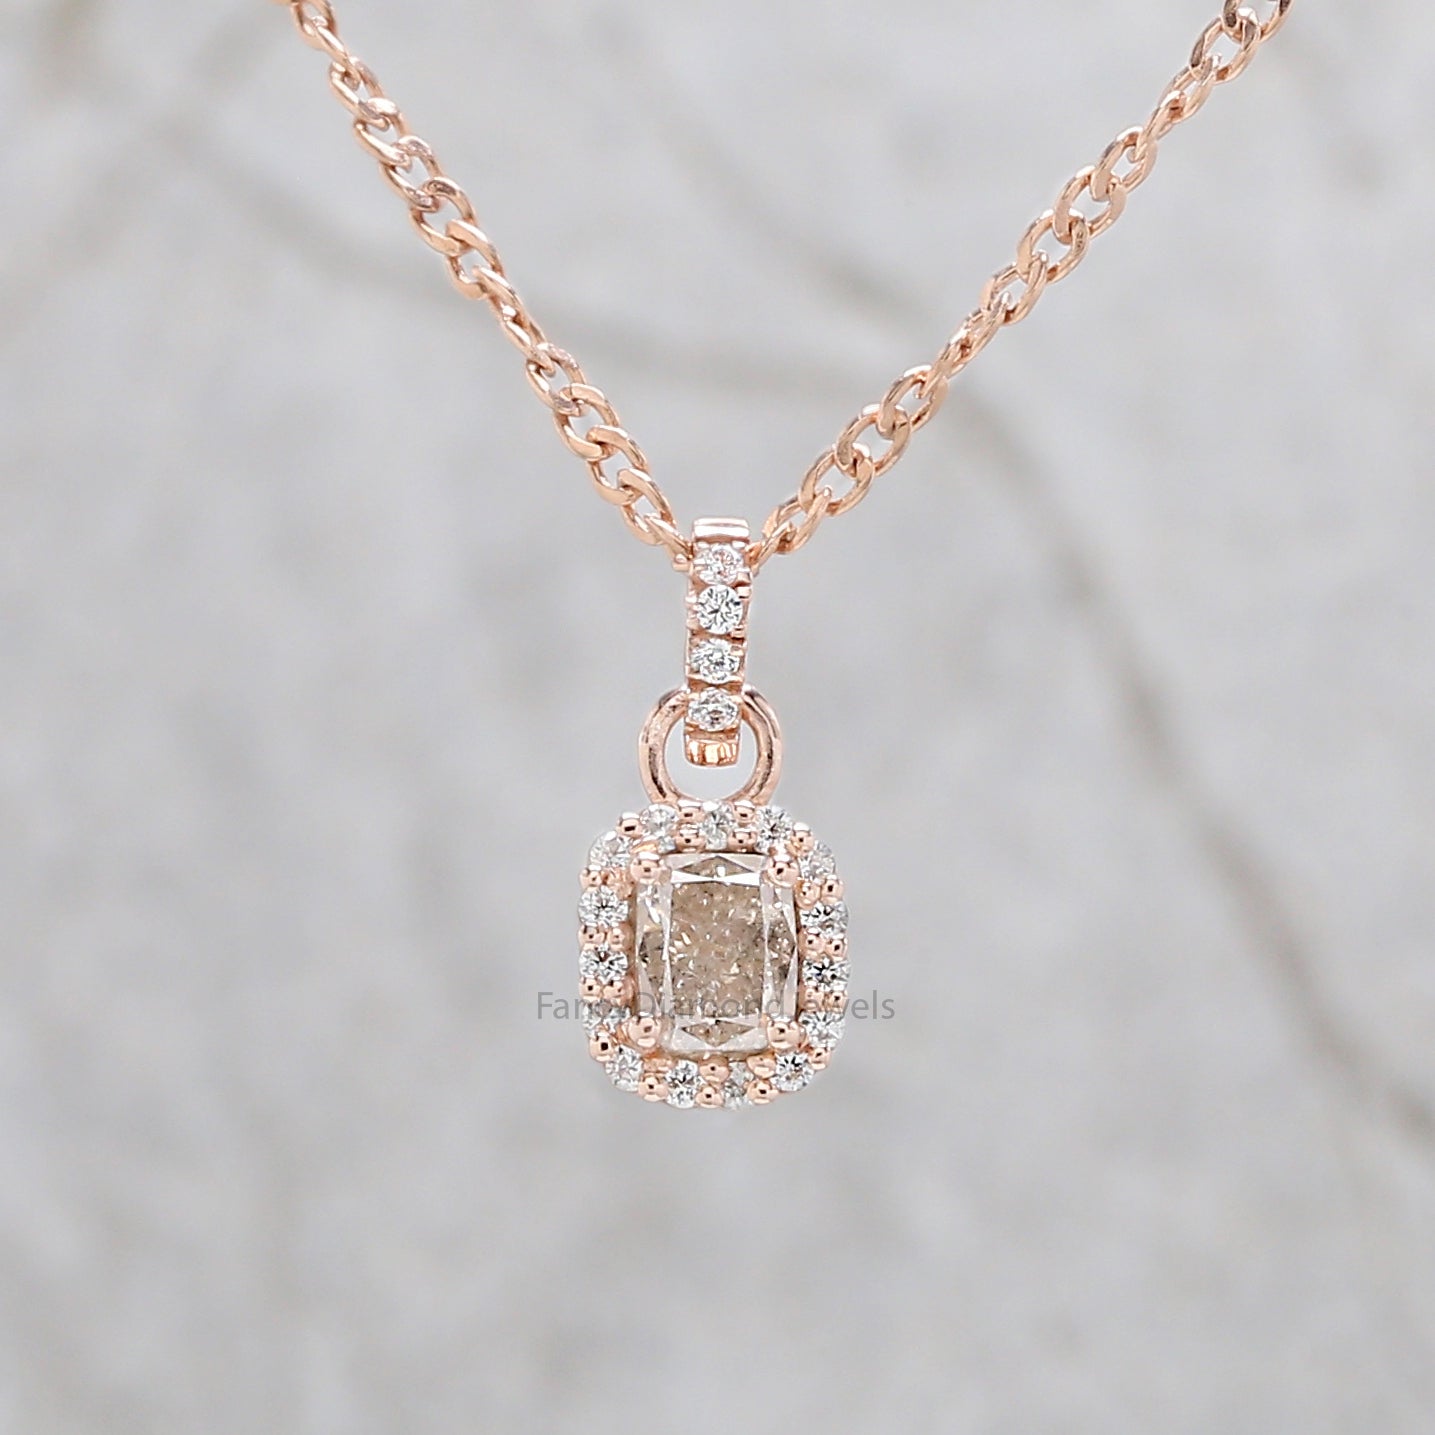 Cushion Cut Grey Color Diamond Pendant 0.36 Ct 4.60 MM Cushion Diamond Pendant 14K Rose Gold Silver Engagement Pendant Gift For Her QN8711